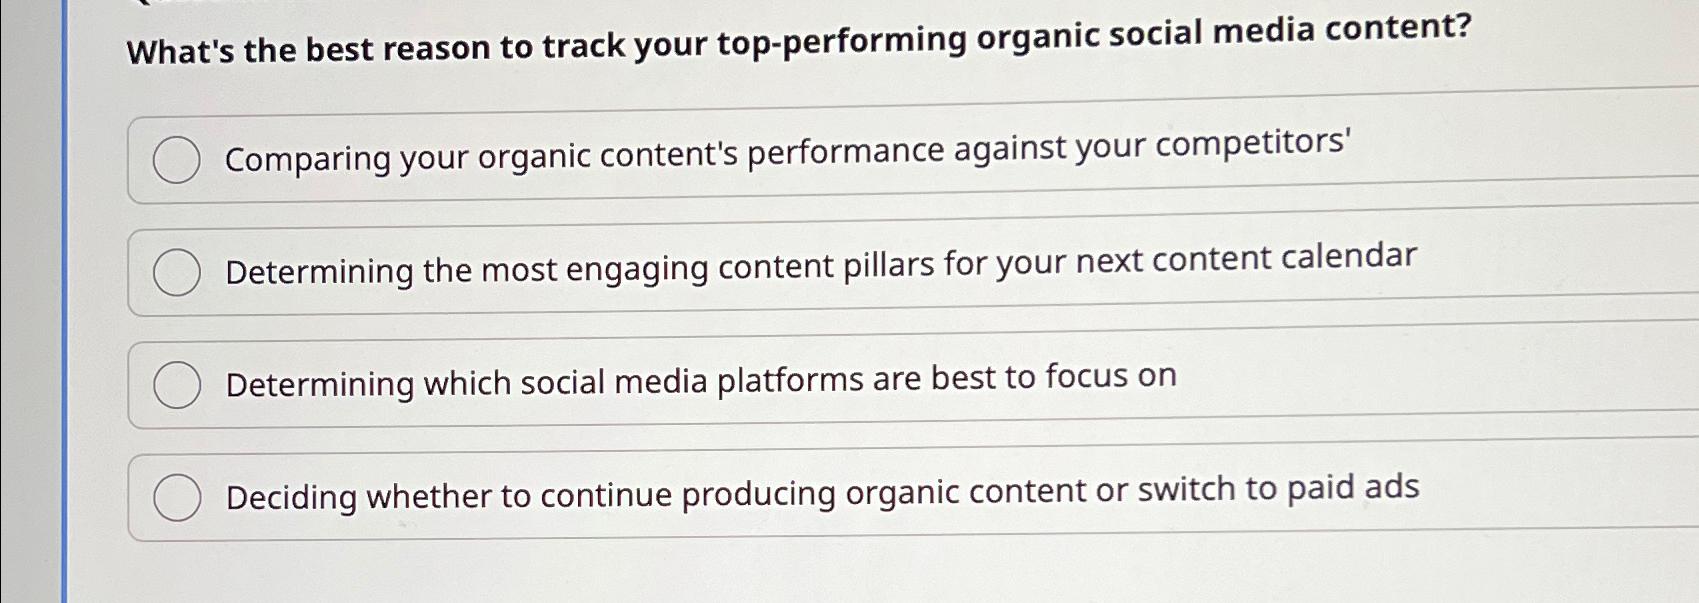 What's the best reason to track your top-performing organic social media content? Comparing your organic